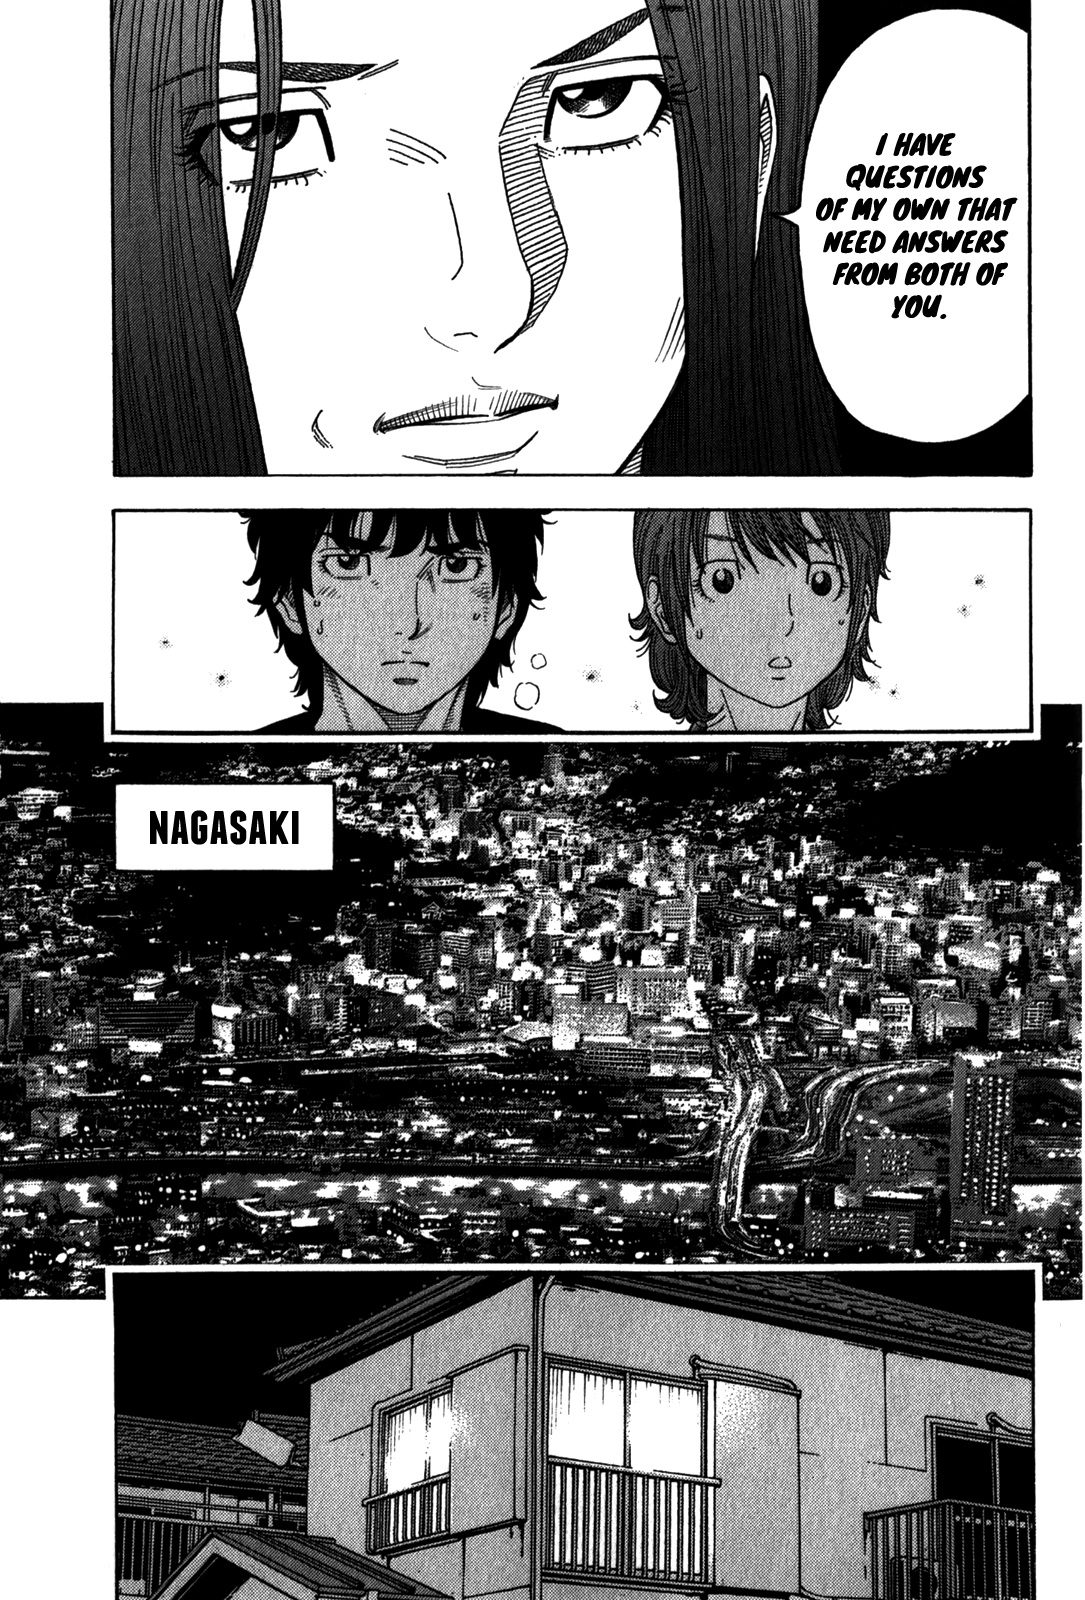 Montage (WATANABE Jun) Vol.10 Chapter 94: Family